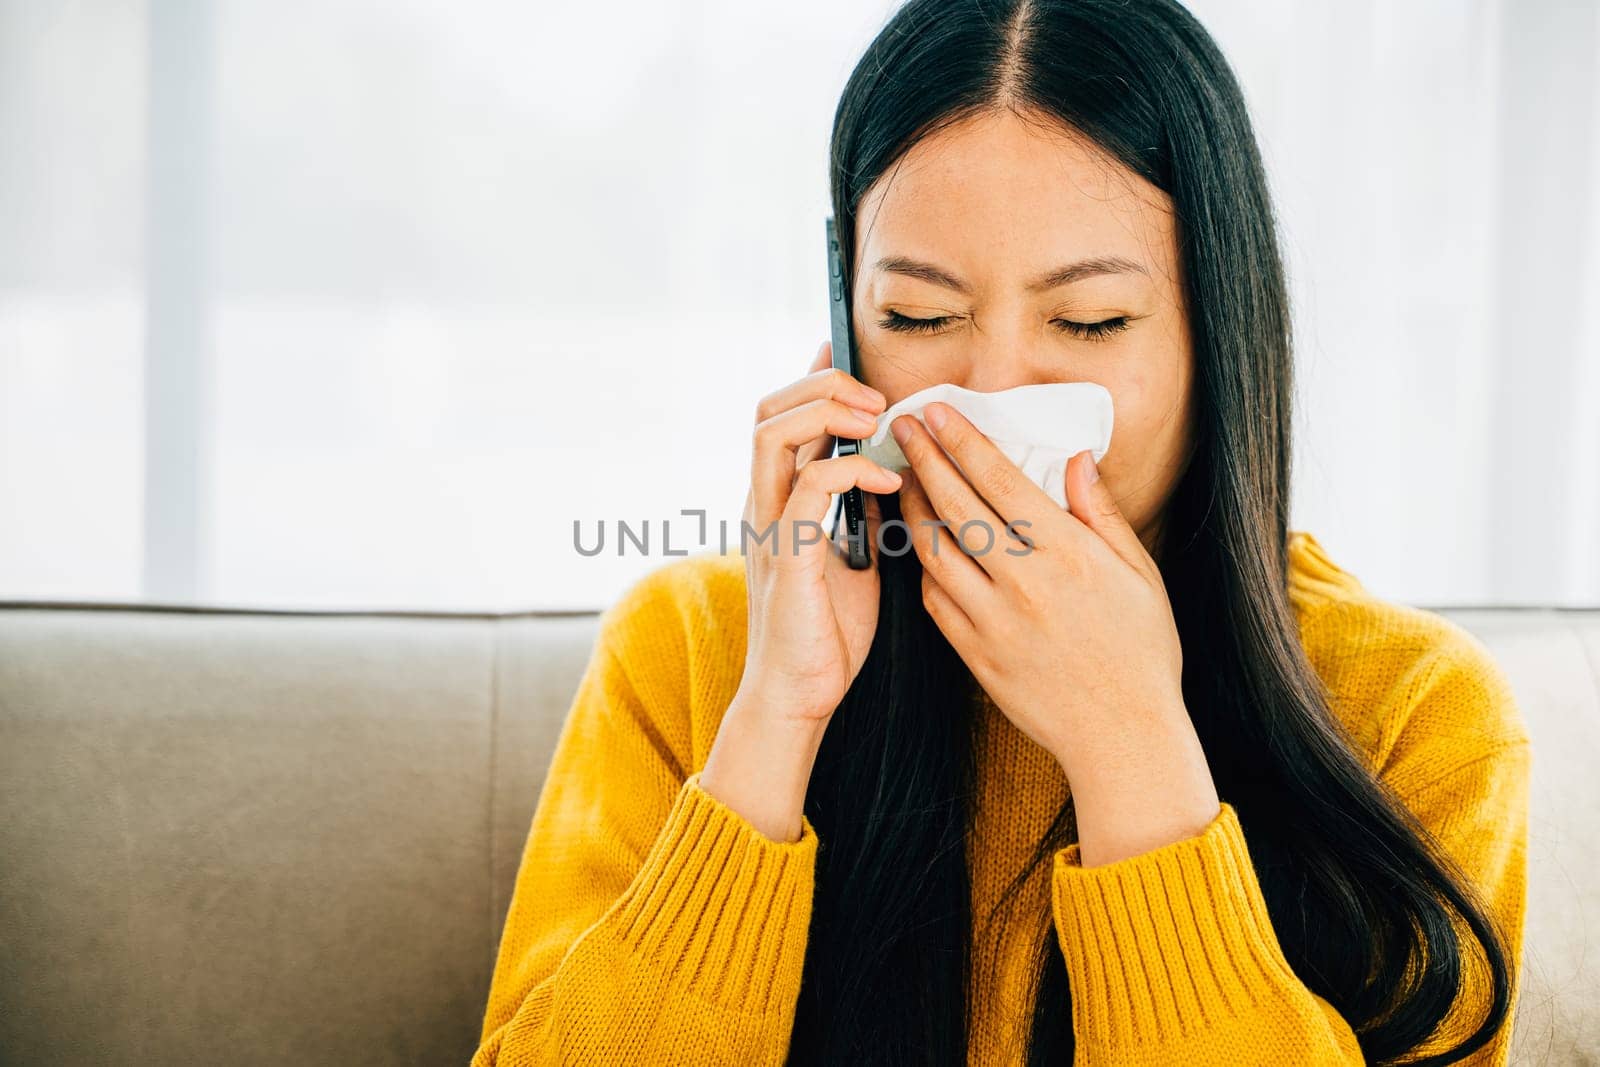 Sitting on sofa sick woman calls doctor blowing wiping nose sneezing into tissue. ill young girl consults practitioner via phone about flu symptoms seeking medicine. Illustrating patient care at home.